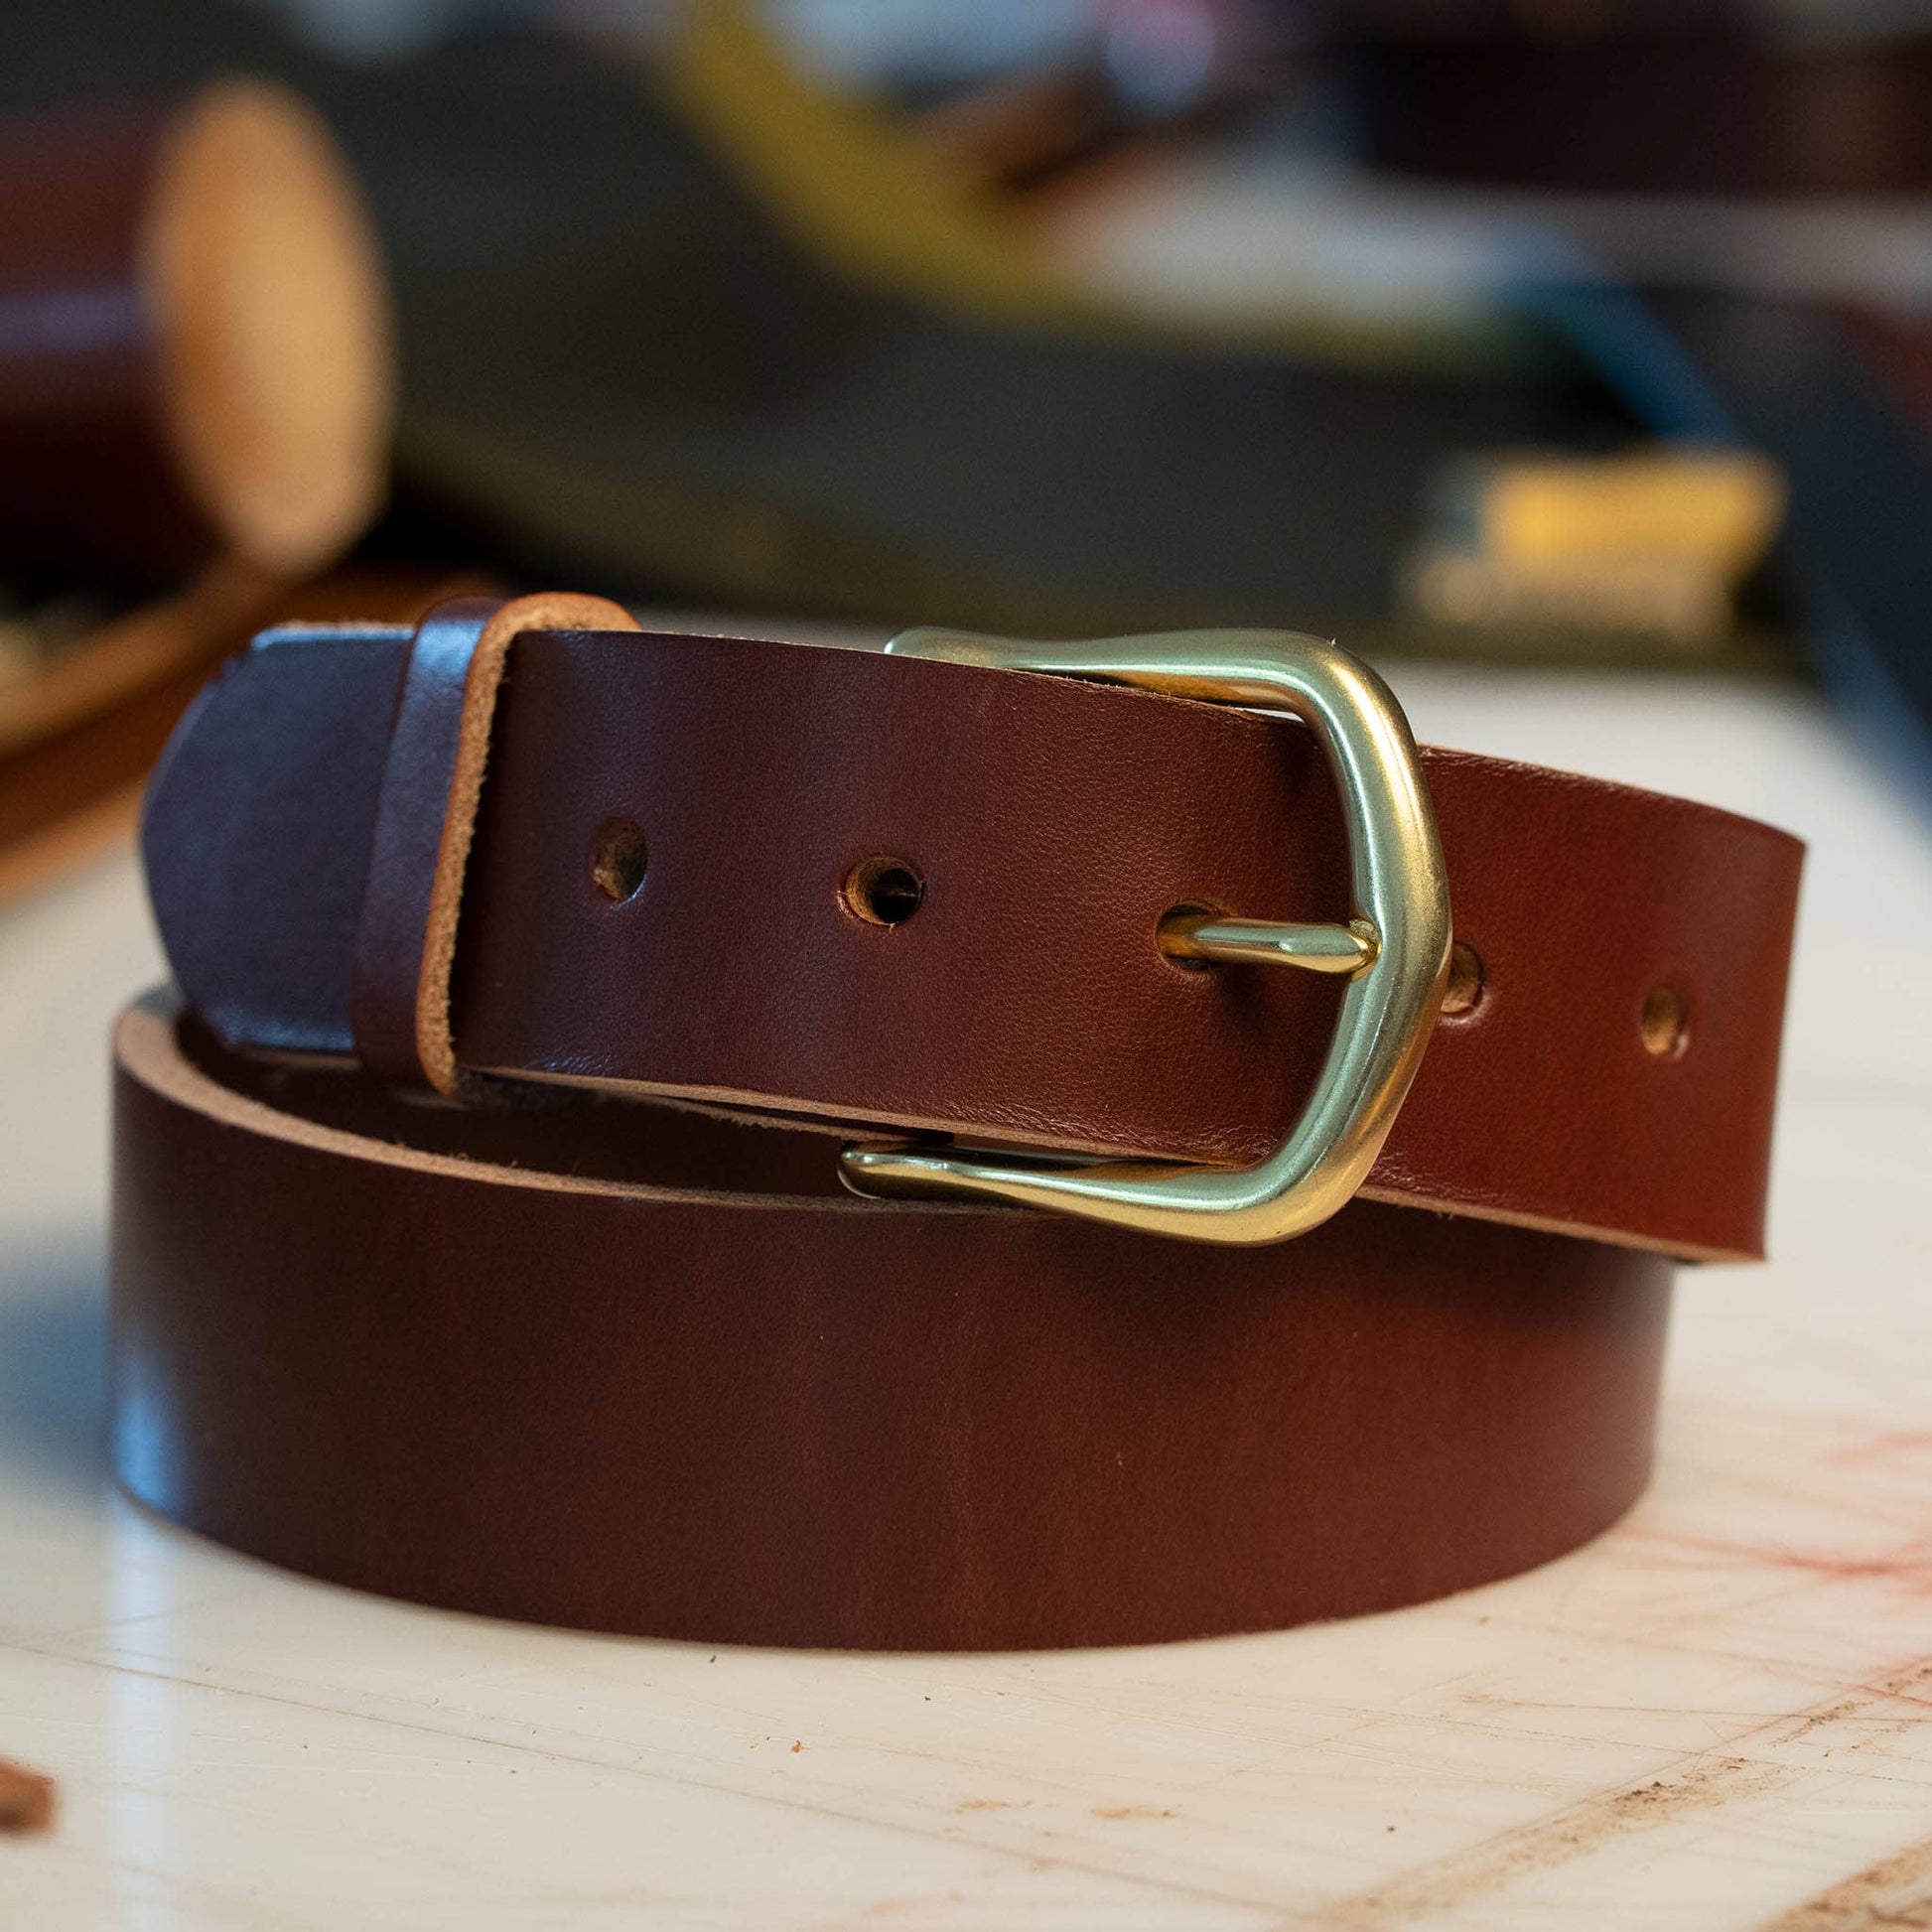 British Brown leather belt with a brass semi dress buckle.